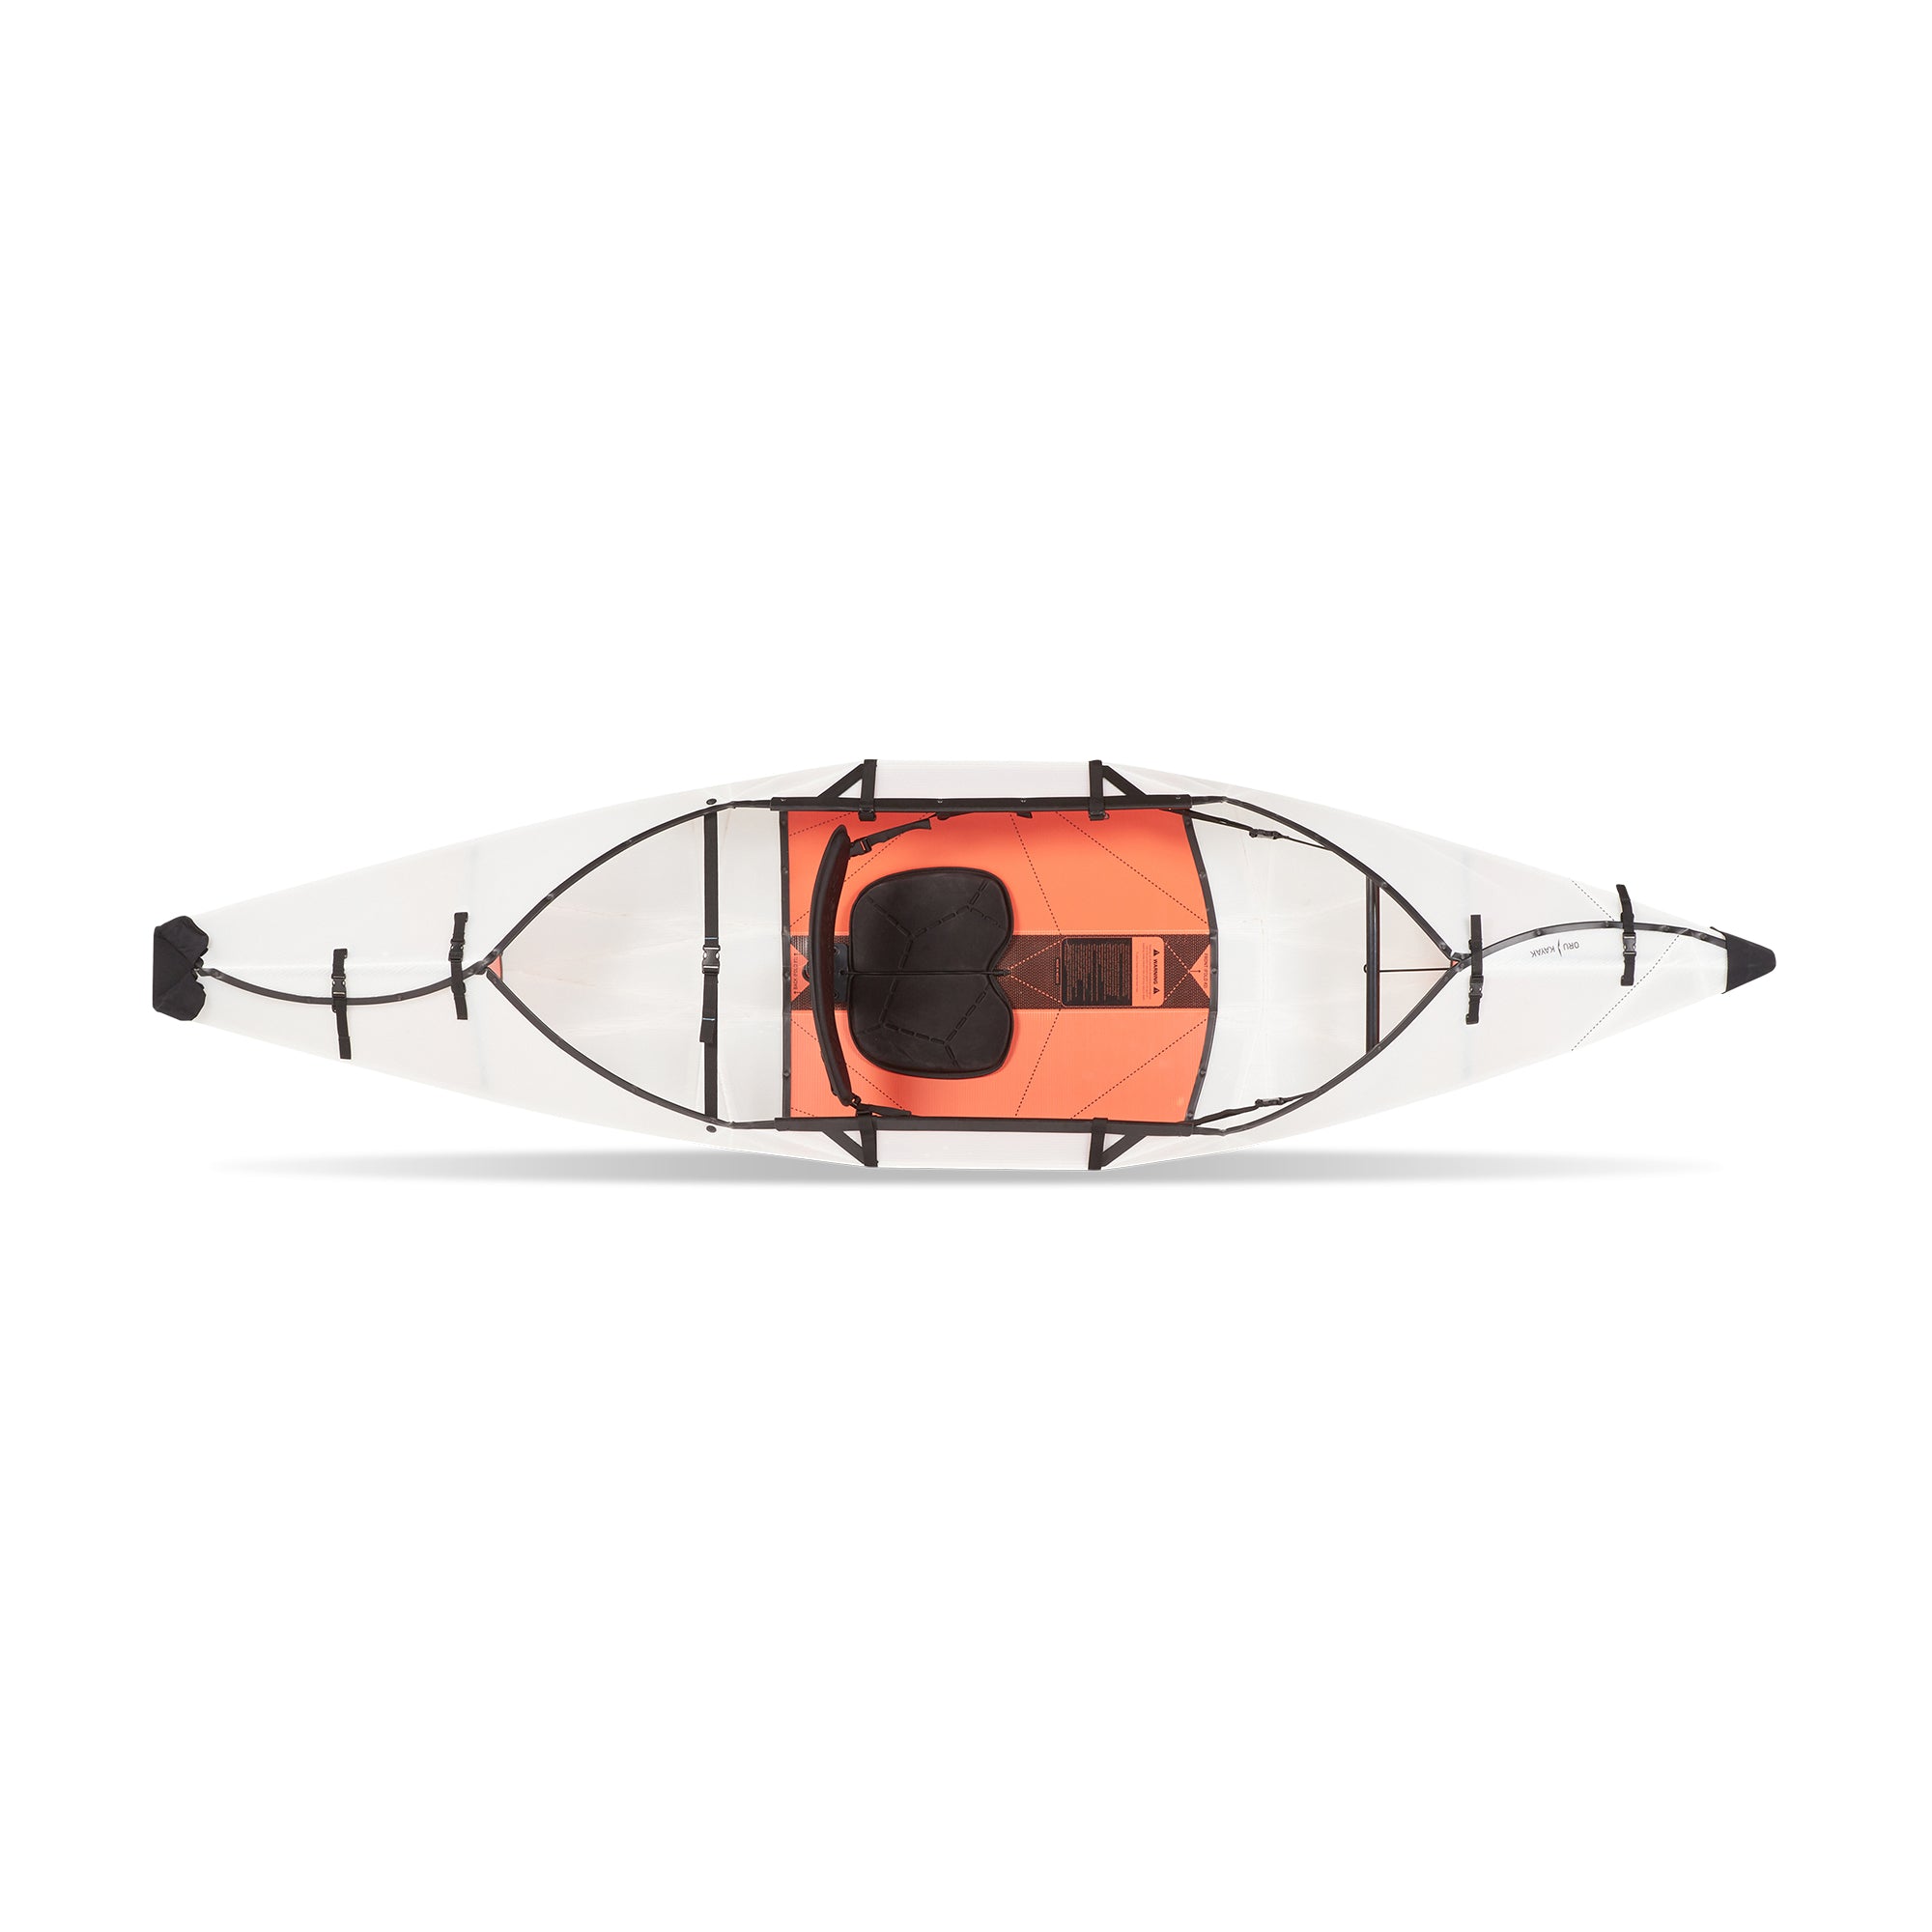 Exciting kayak with cooler box For Thrill And Adventure 